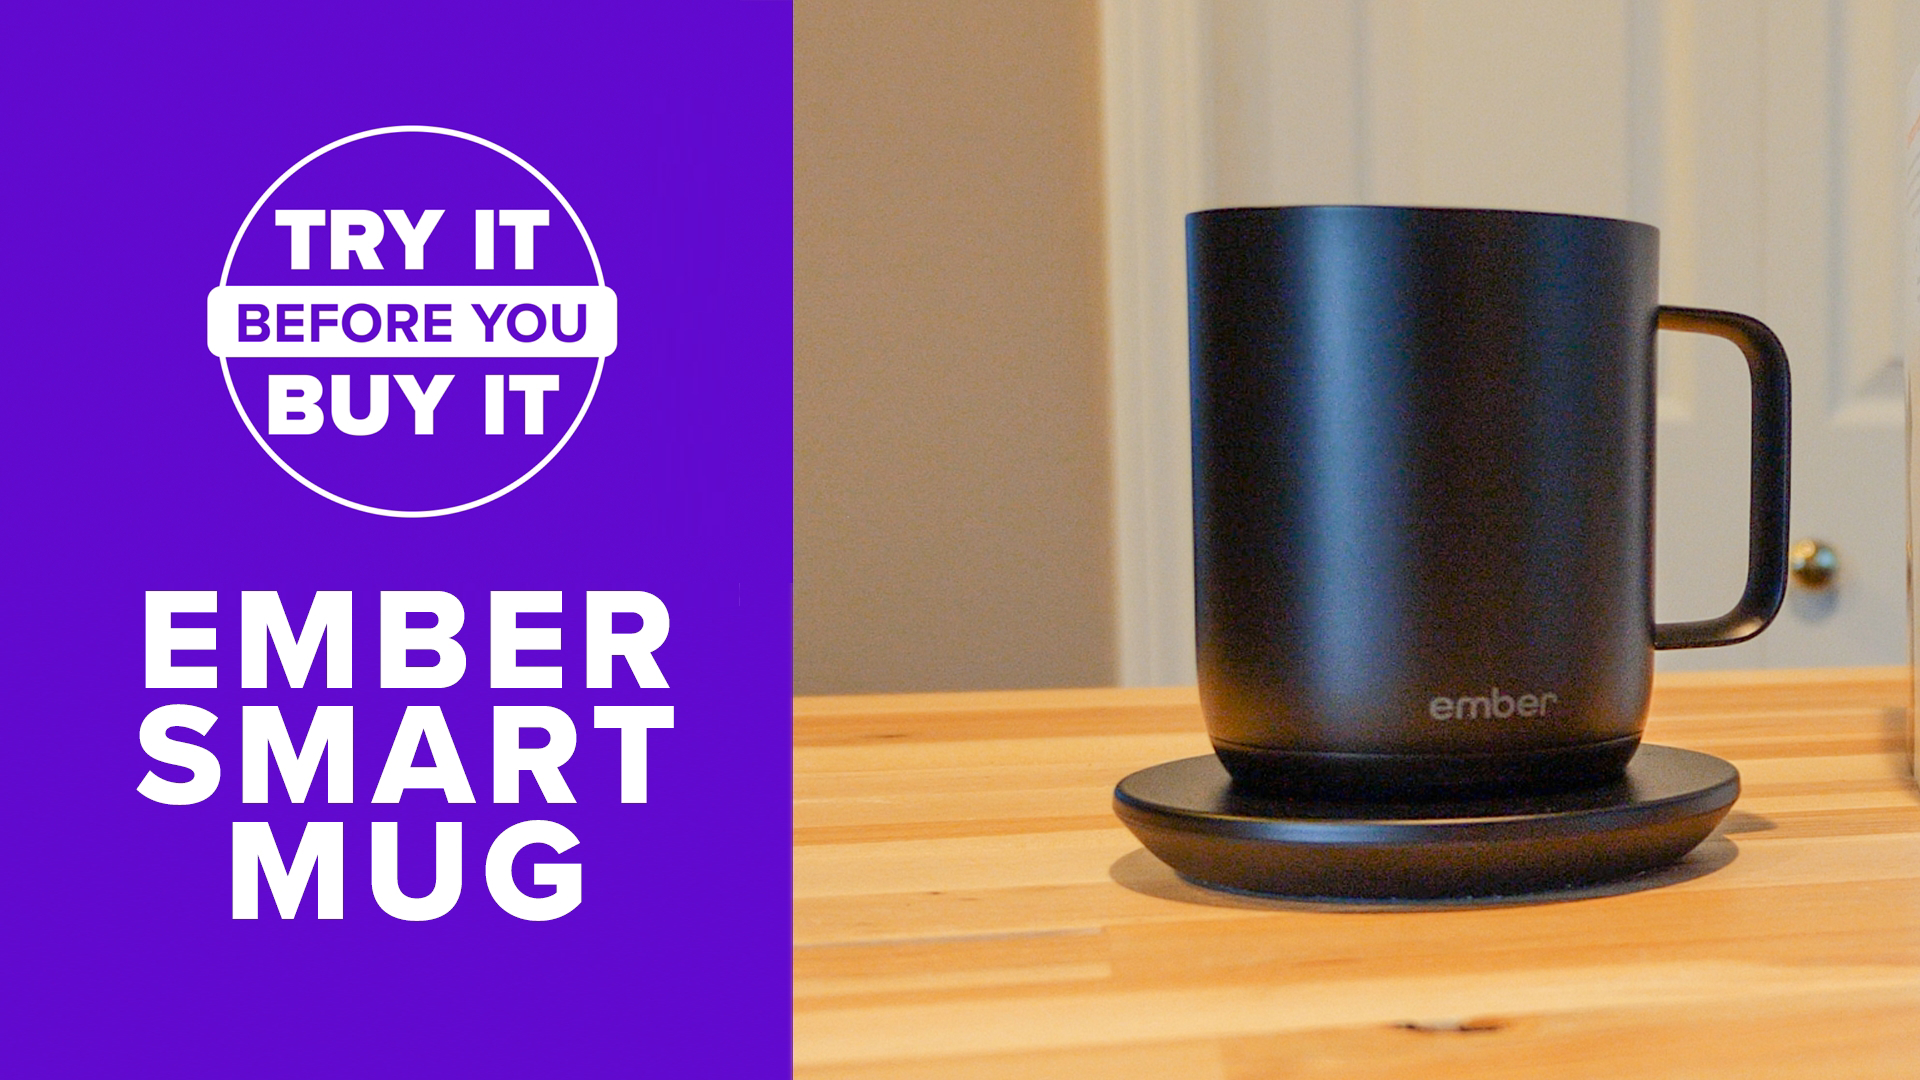 We test out a smart mug that promises to keep your warm beverages at a constant temperature.